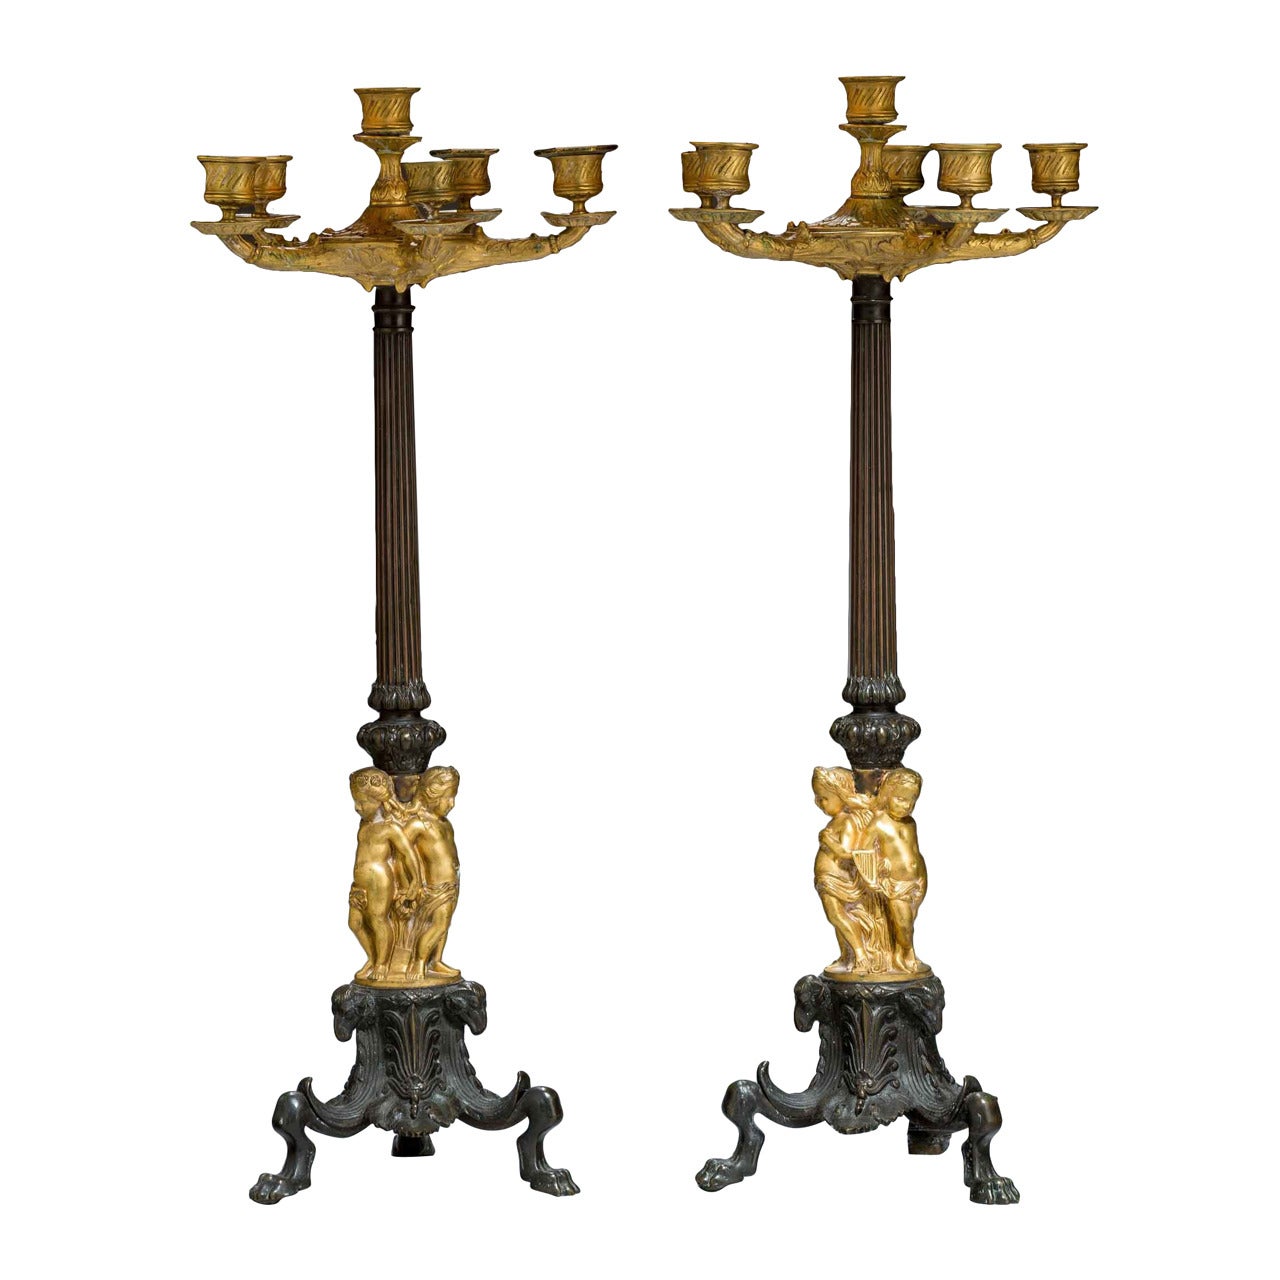 Pair of 19th Century, Six-Arm Candelabras For Sale